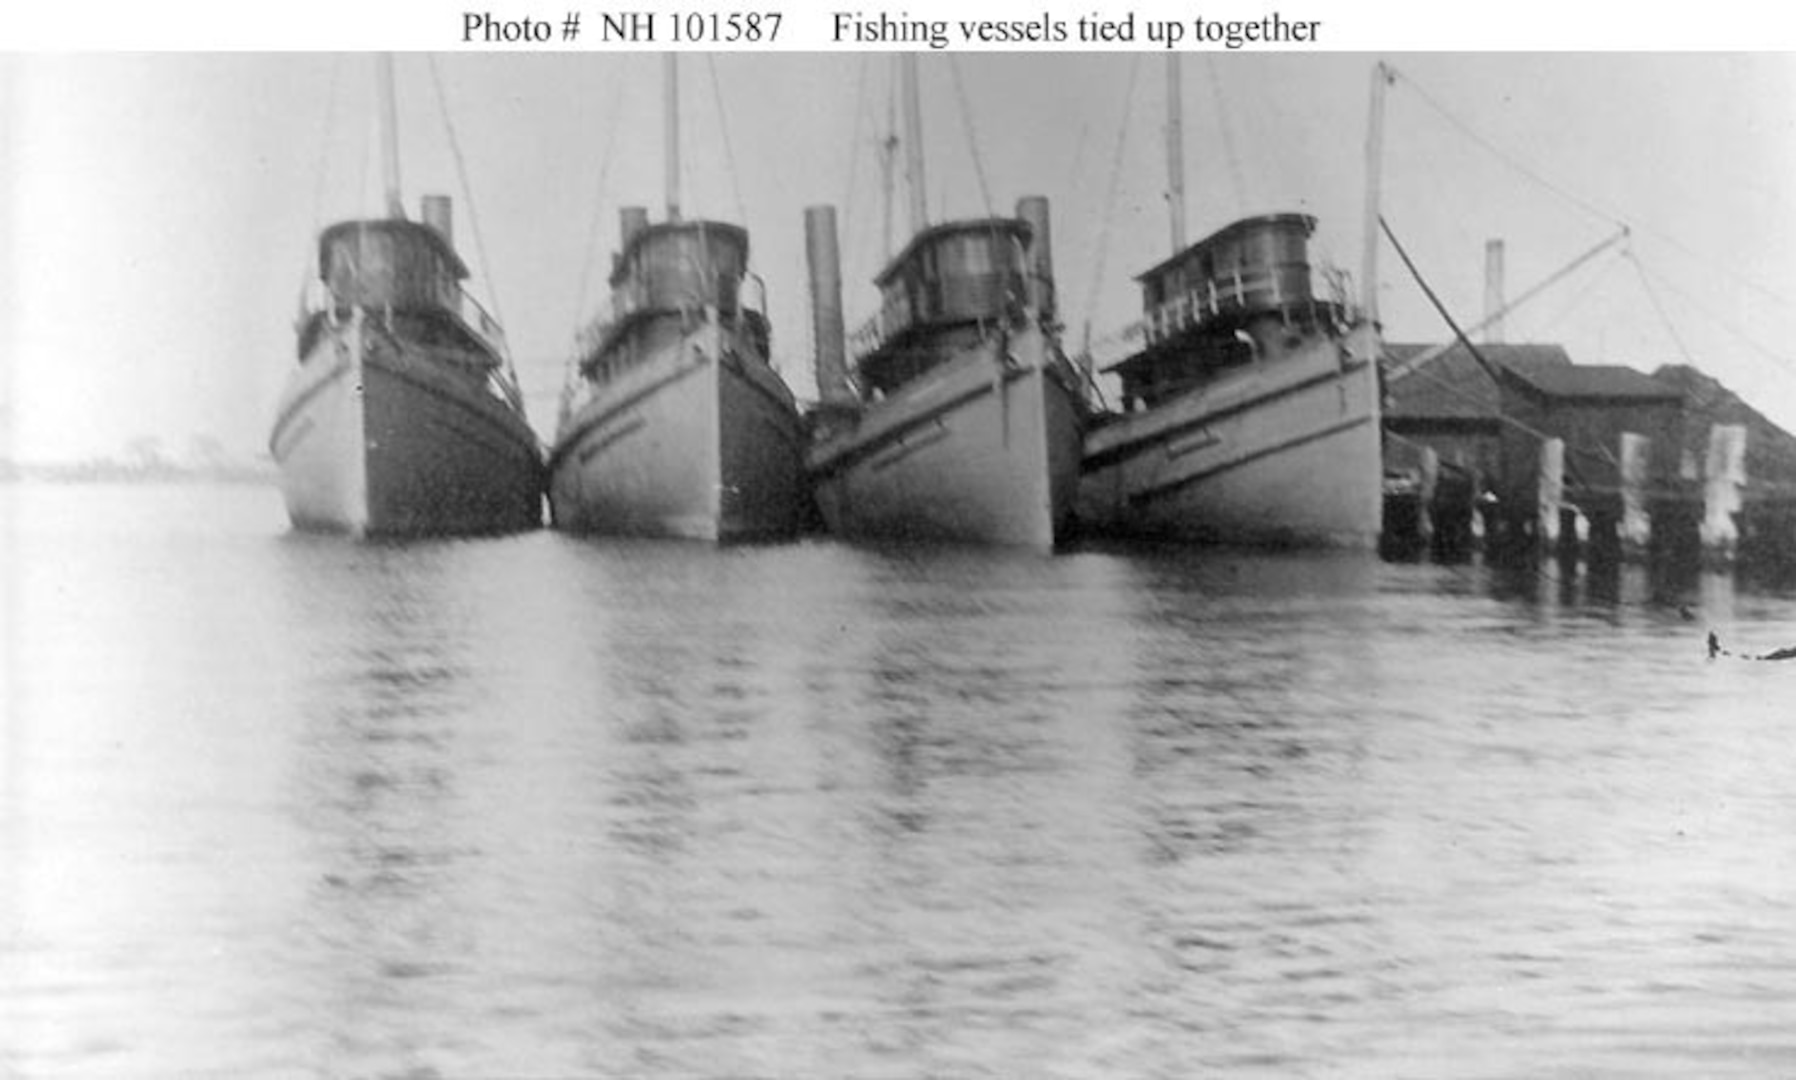 .  Photo of Menhaden fishing vessels about to be converted to naval vessels for wartime service. (Naval History and Heritage Command)